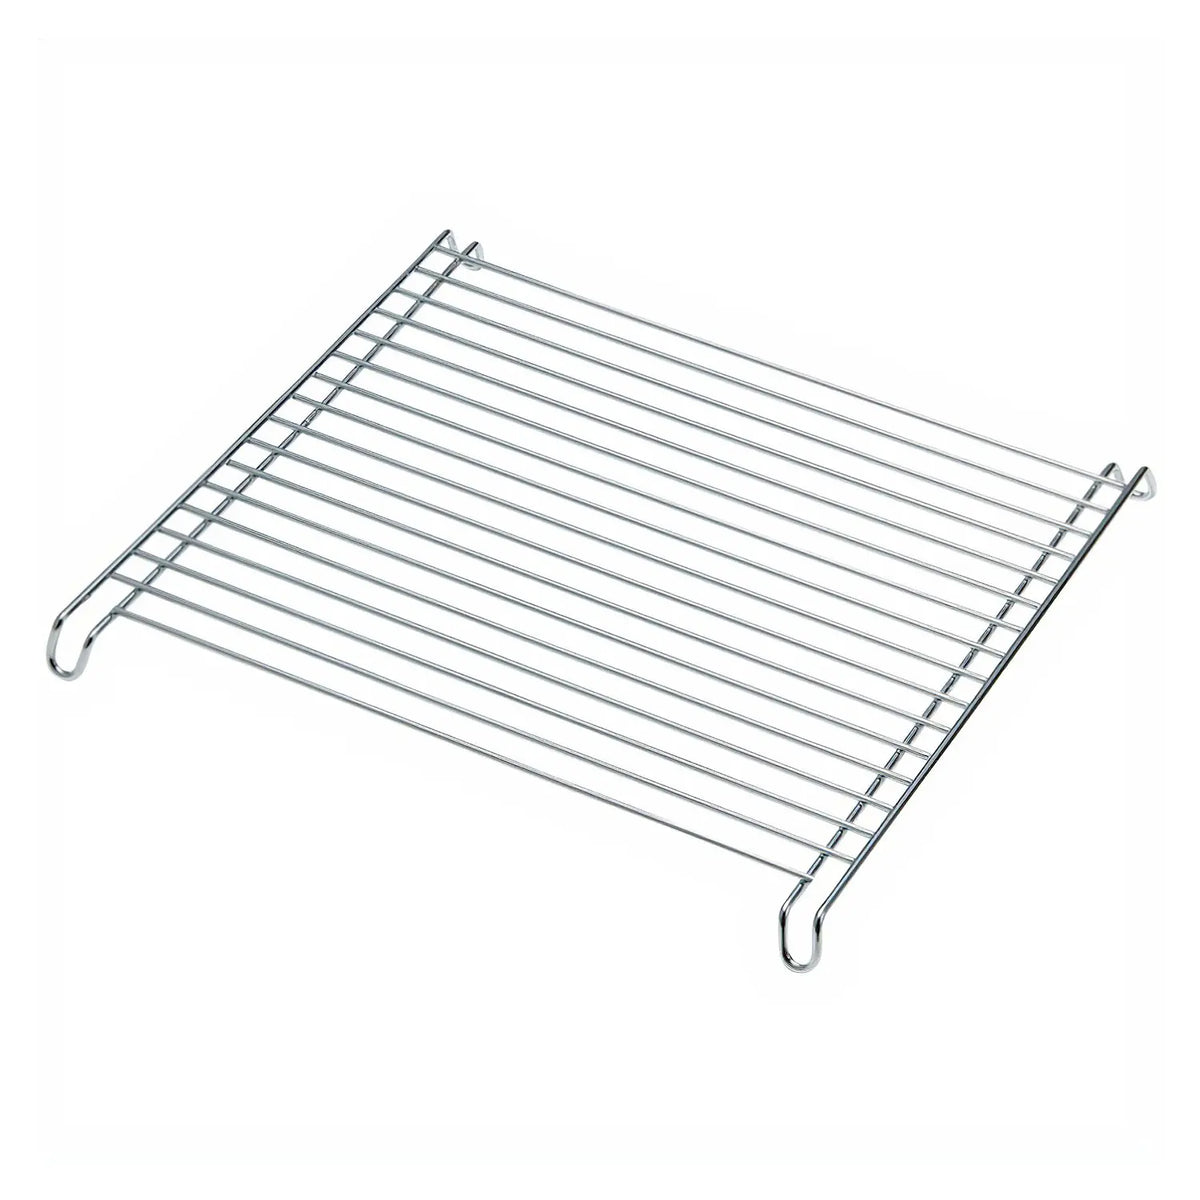 Vogue Cooling Rack 432 x 254mm | J810 | Next Day Catering